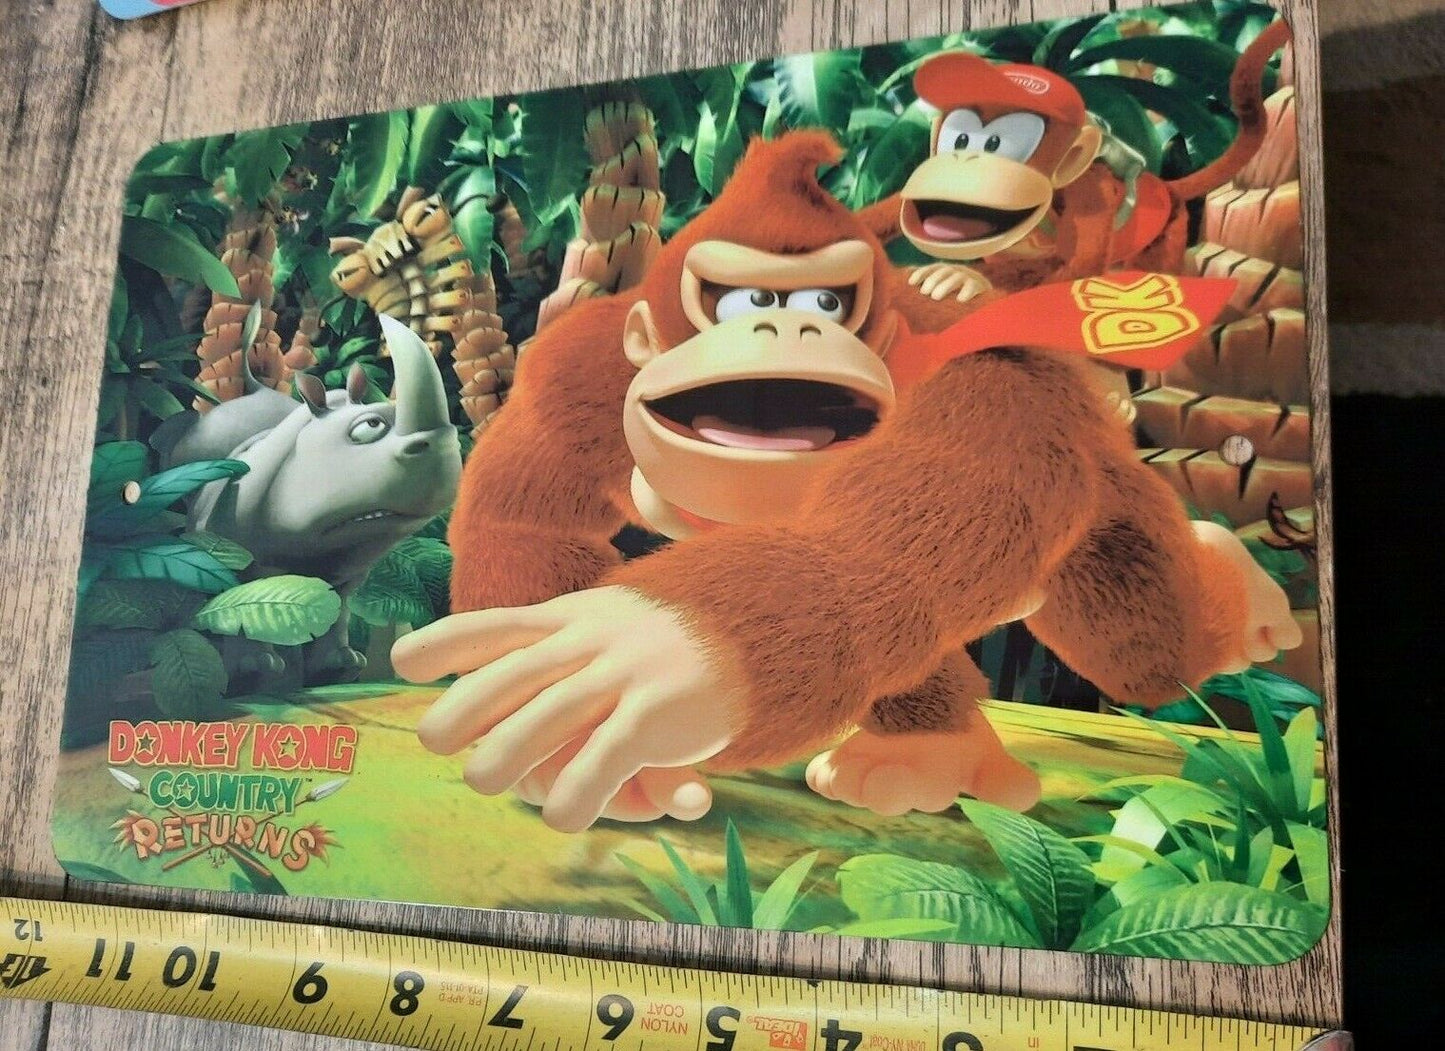 Donkey Kong Country Returns 8x12 Metal Wall Sign Arcade Video Game